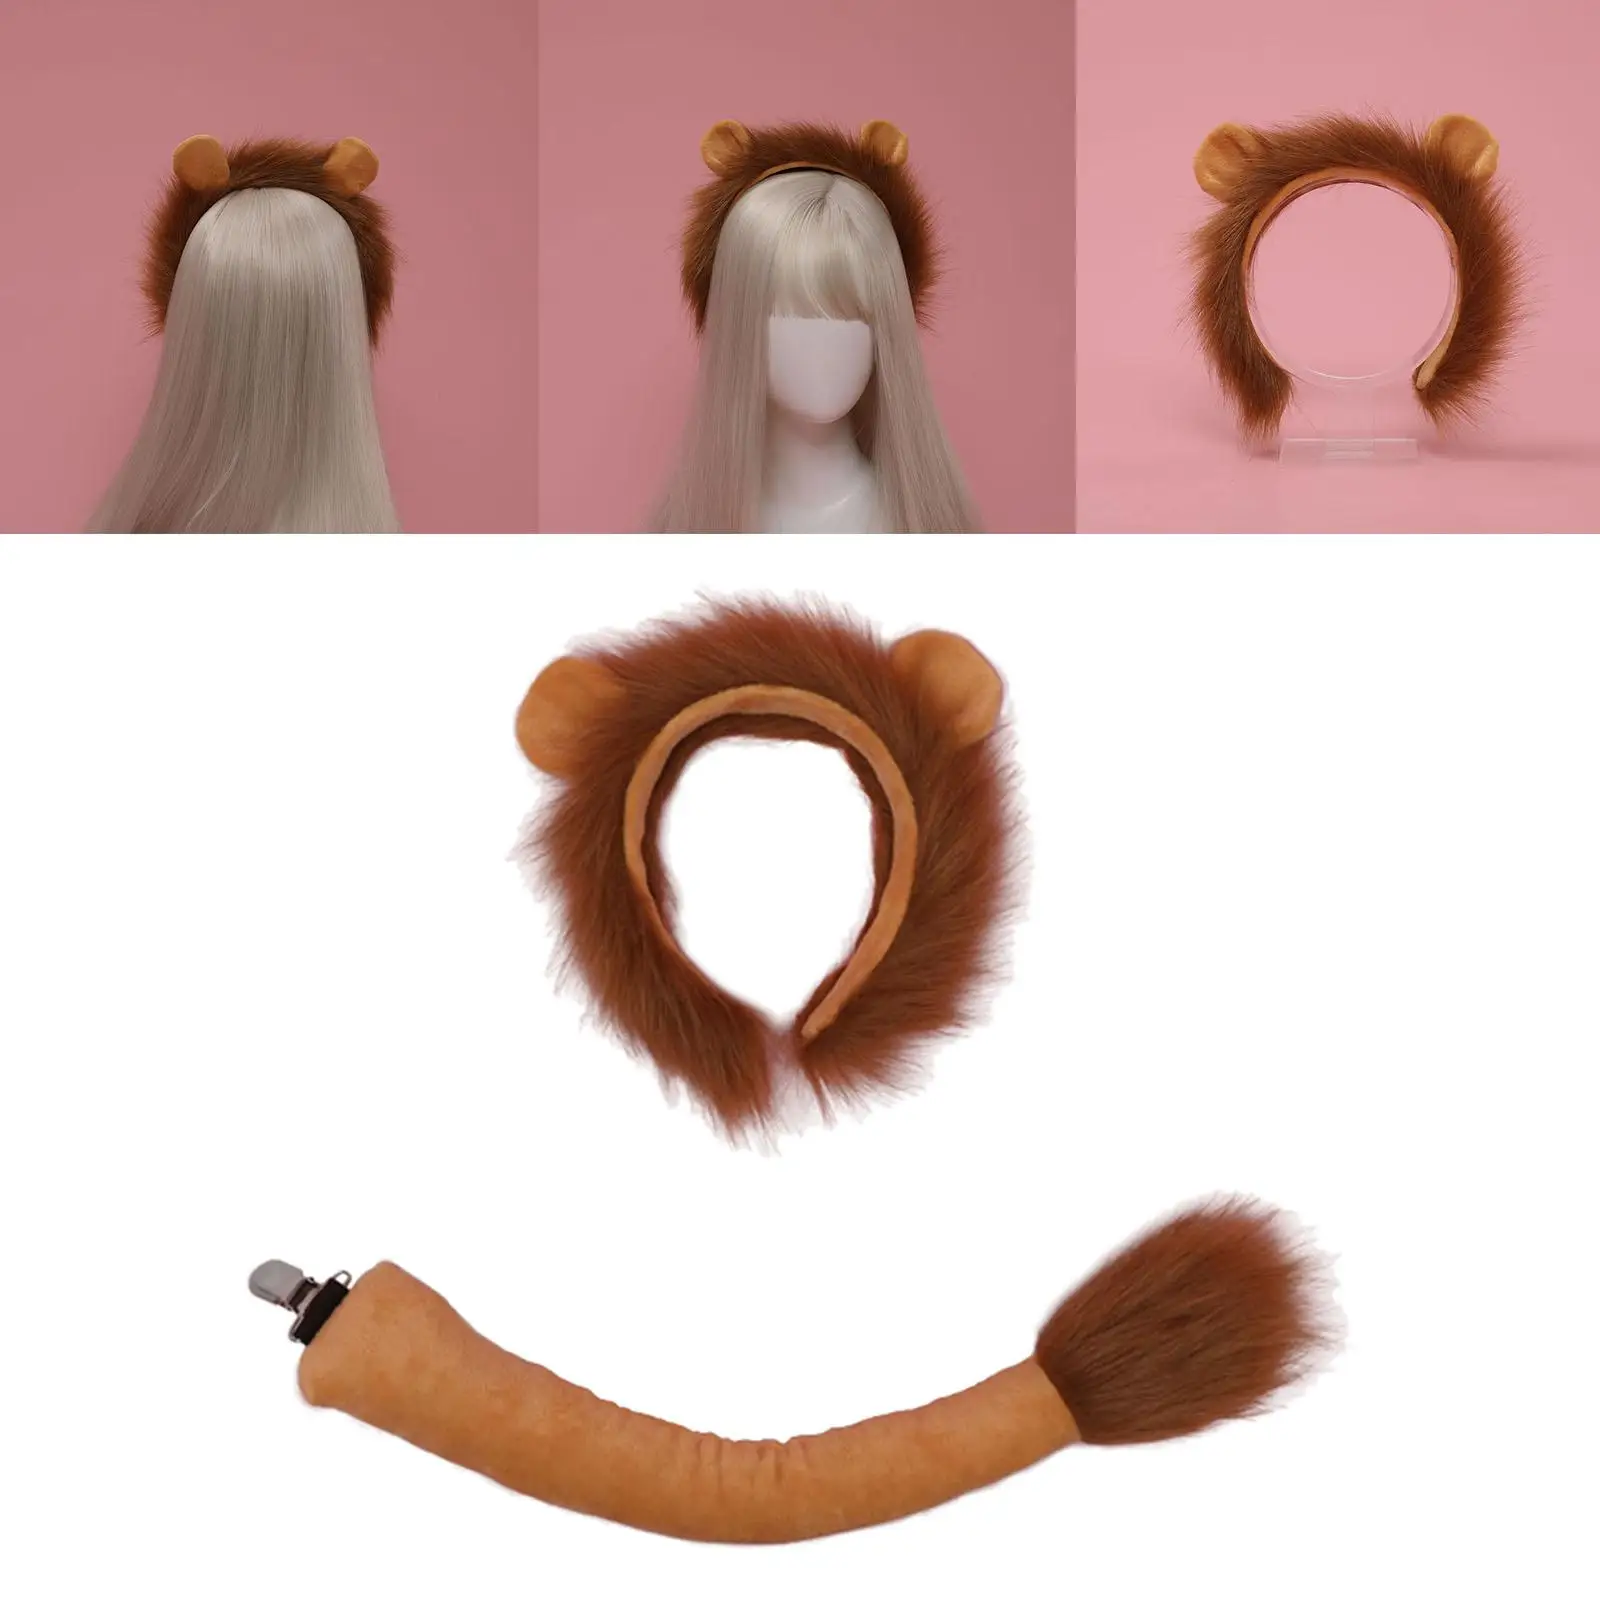 Lion Tail Ears Set Plush Fancy Dress Jungle Animal Ears Costume Headwear Cosplay for Adult Show Halloween Carnival Party